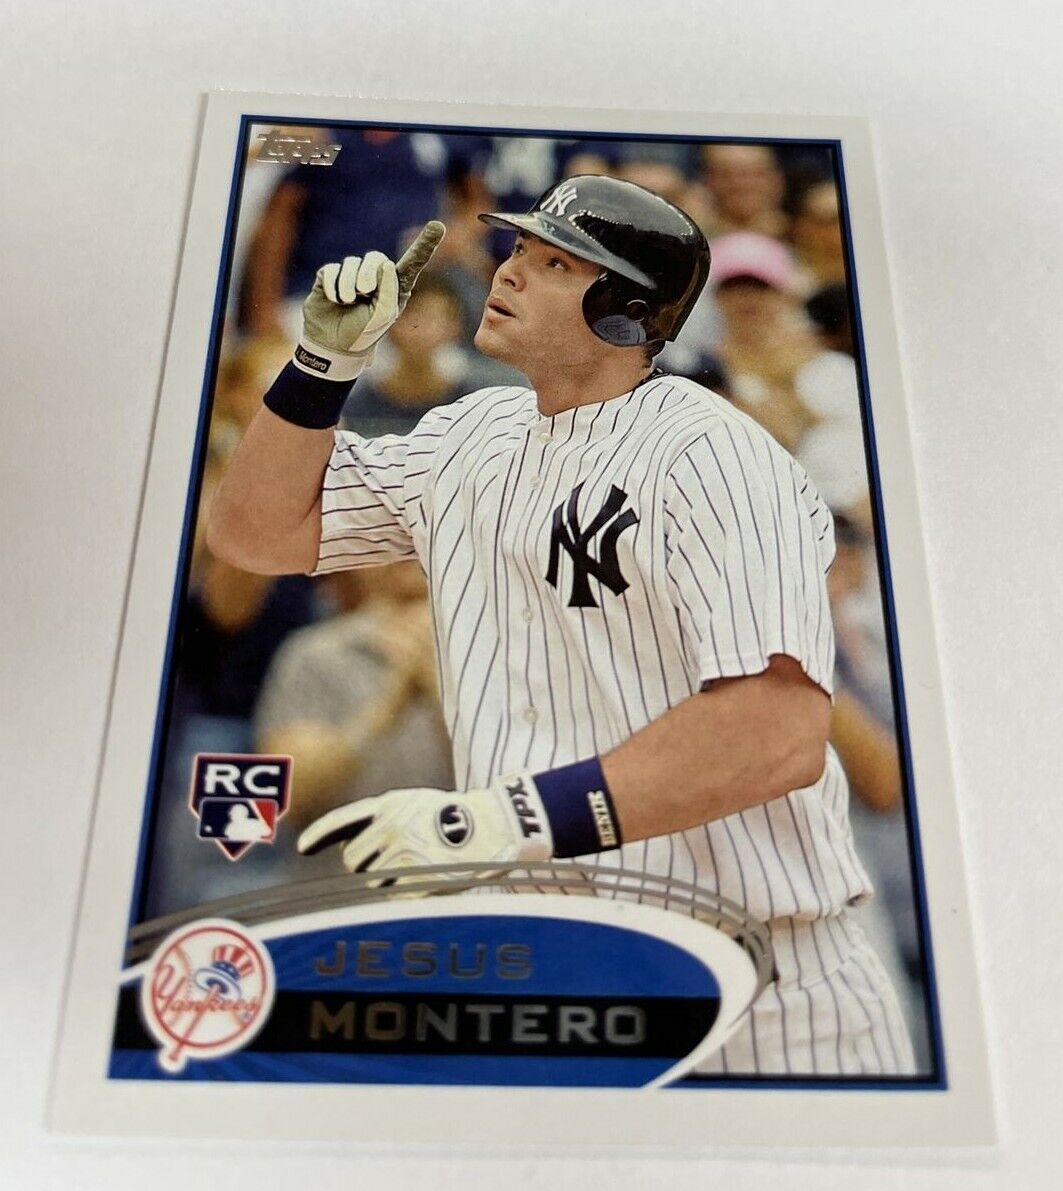 2012 Topps (Series 1) Rookie Card #9 Jesus Montero (New York Yankees). rookie card picture